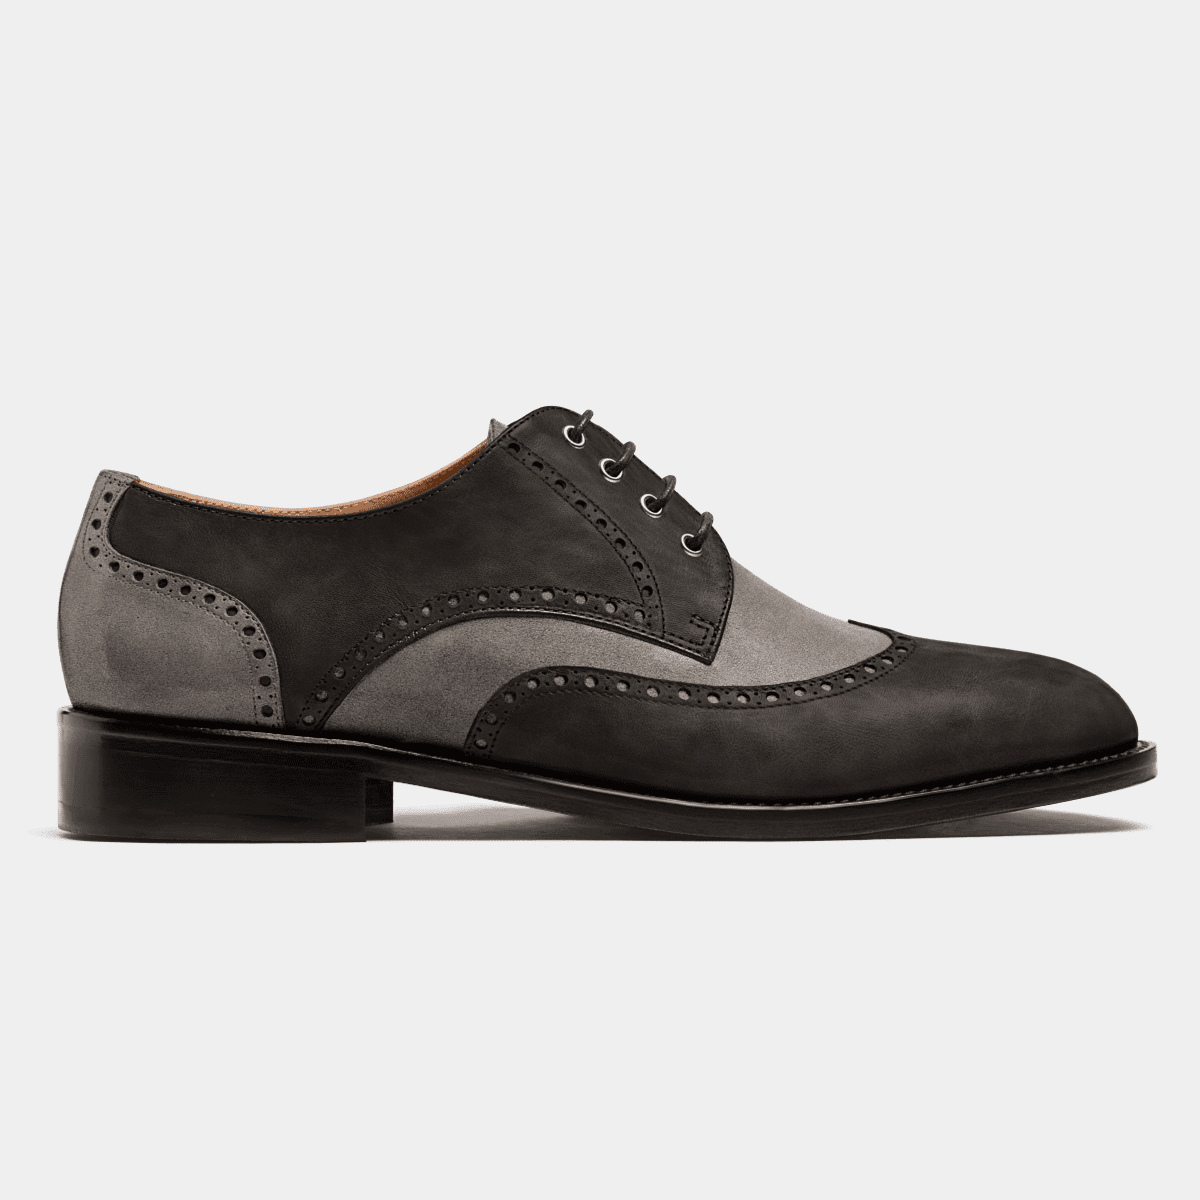 Full Brogue shoes - grey waxed leather & suede